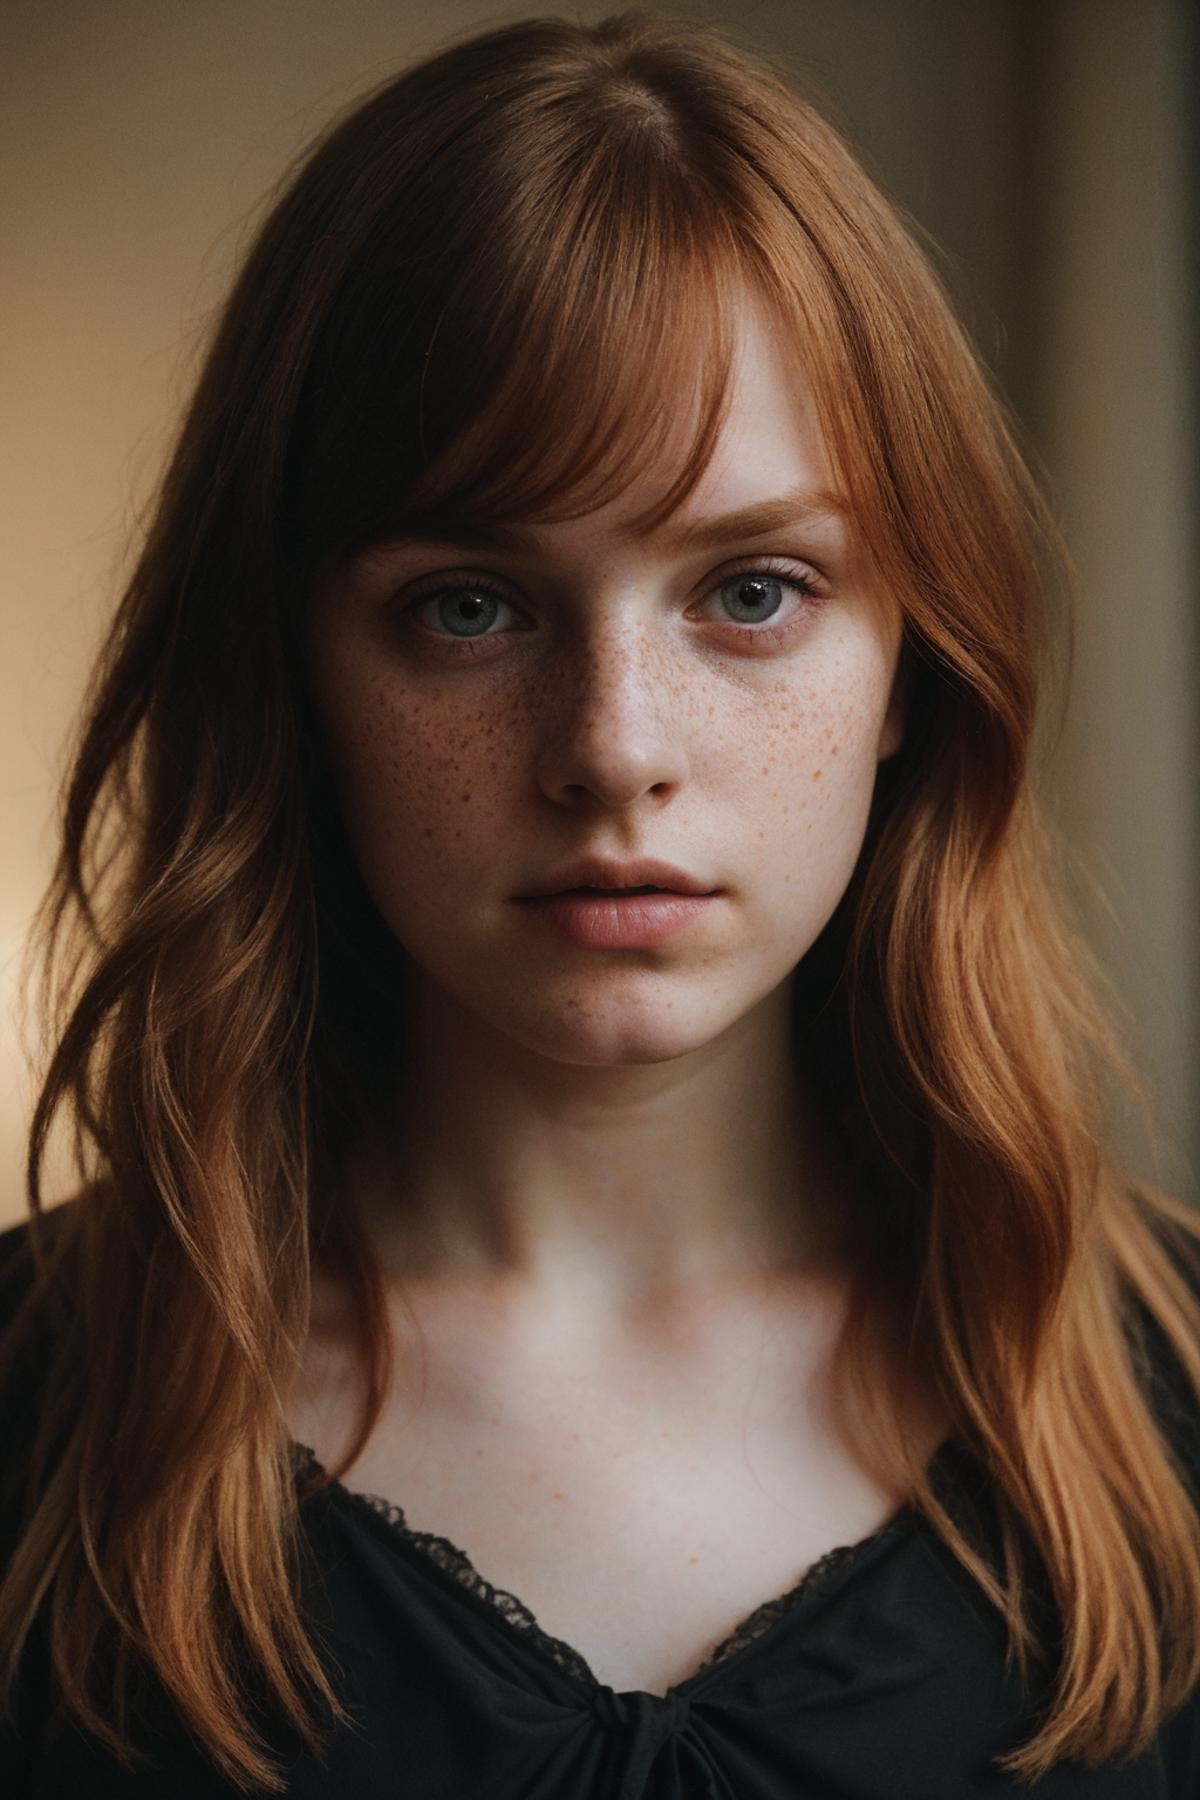 A close-up of a woman with freckles, red hair, and a neutral expression.